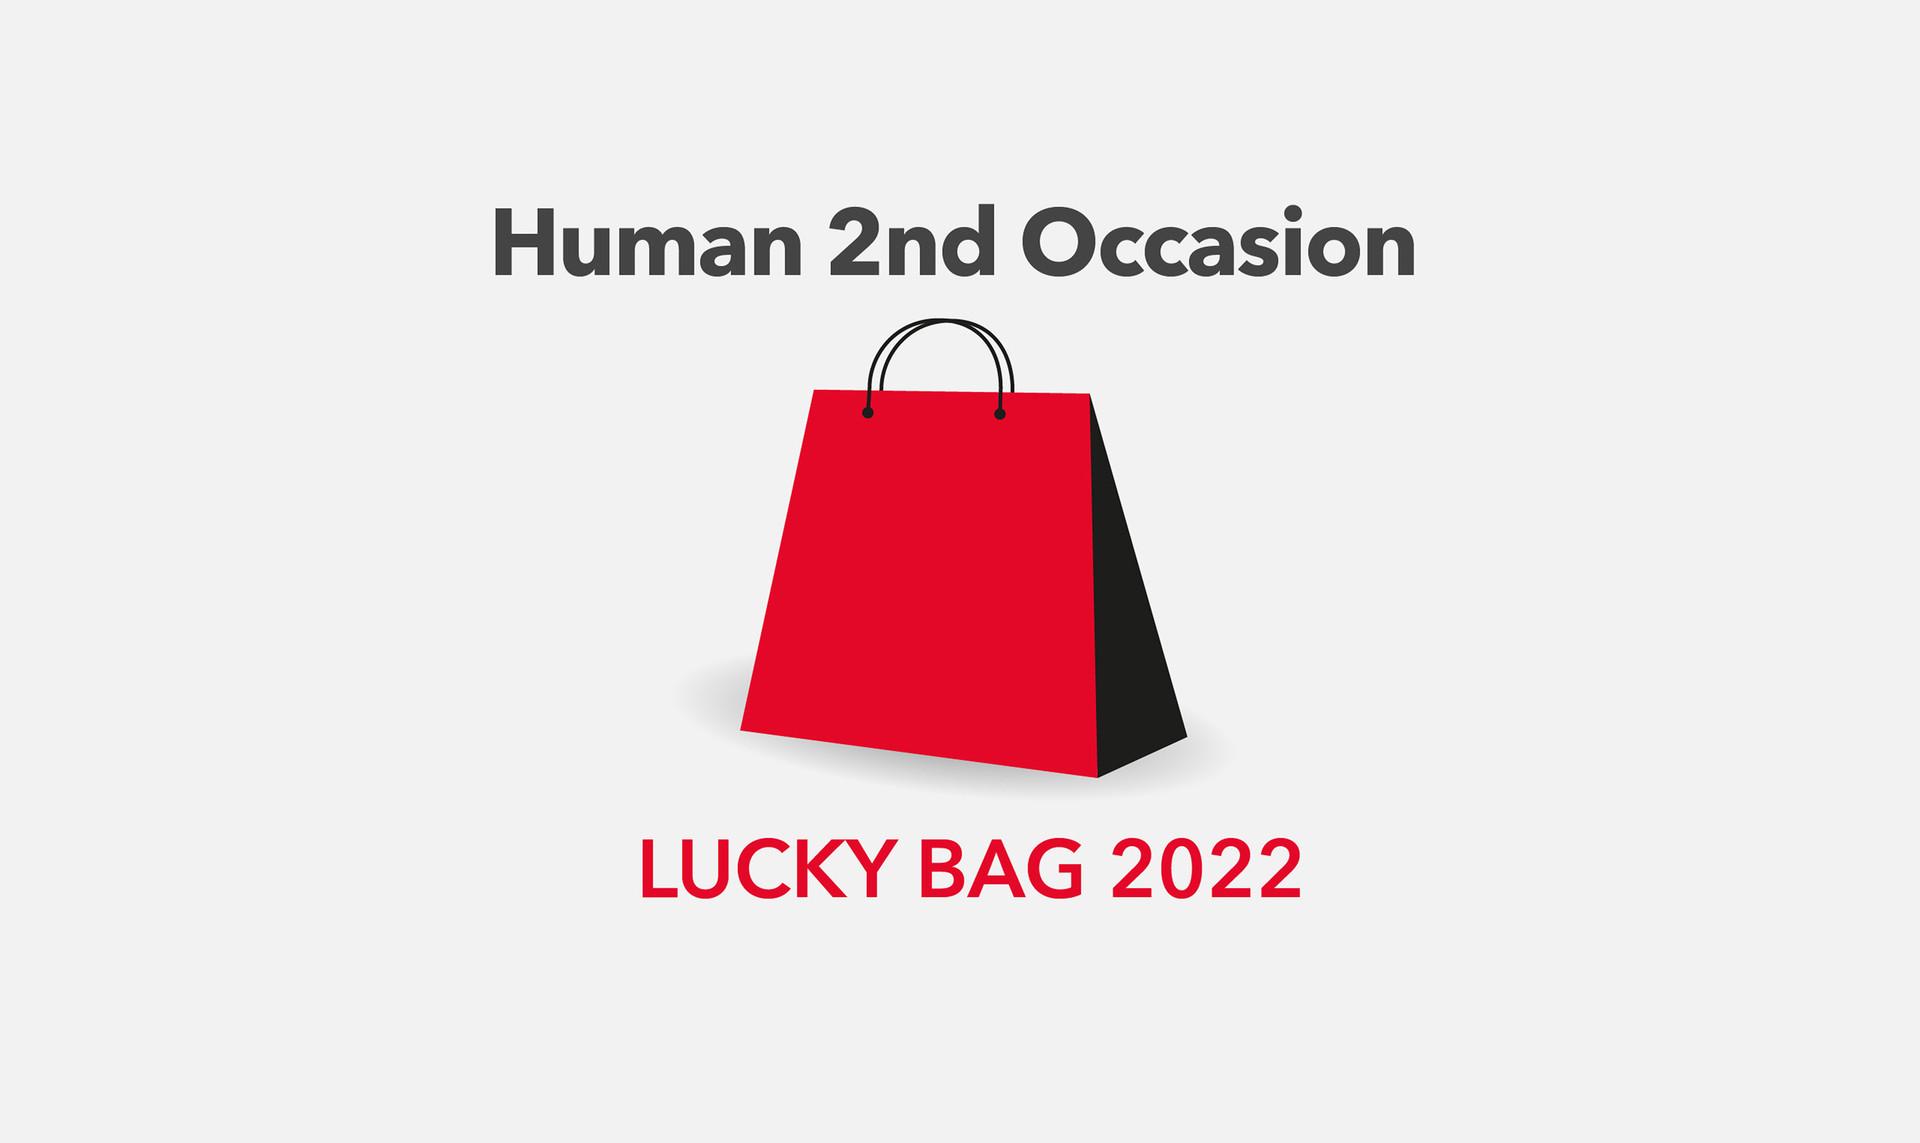 Human 2nd Occasion：LUCKY BAG